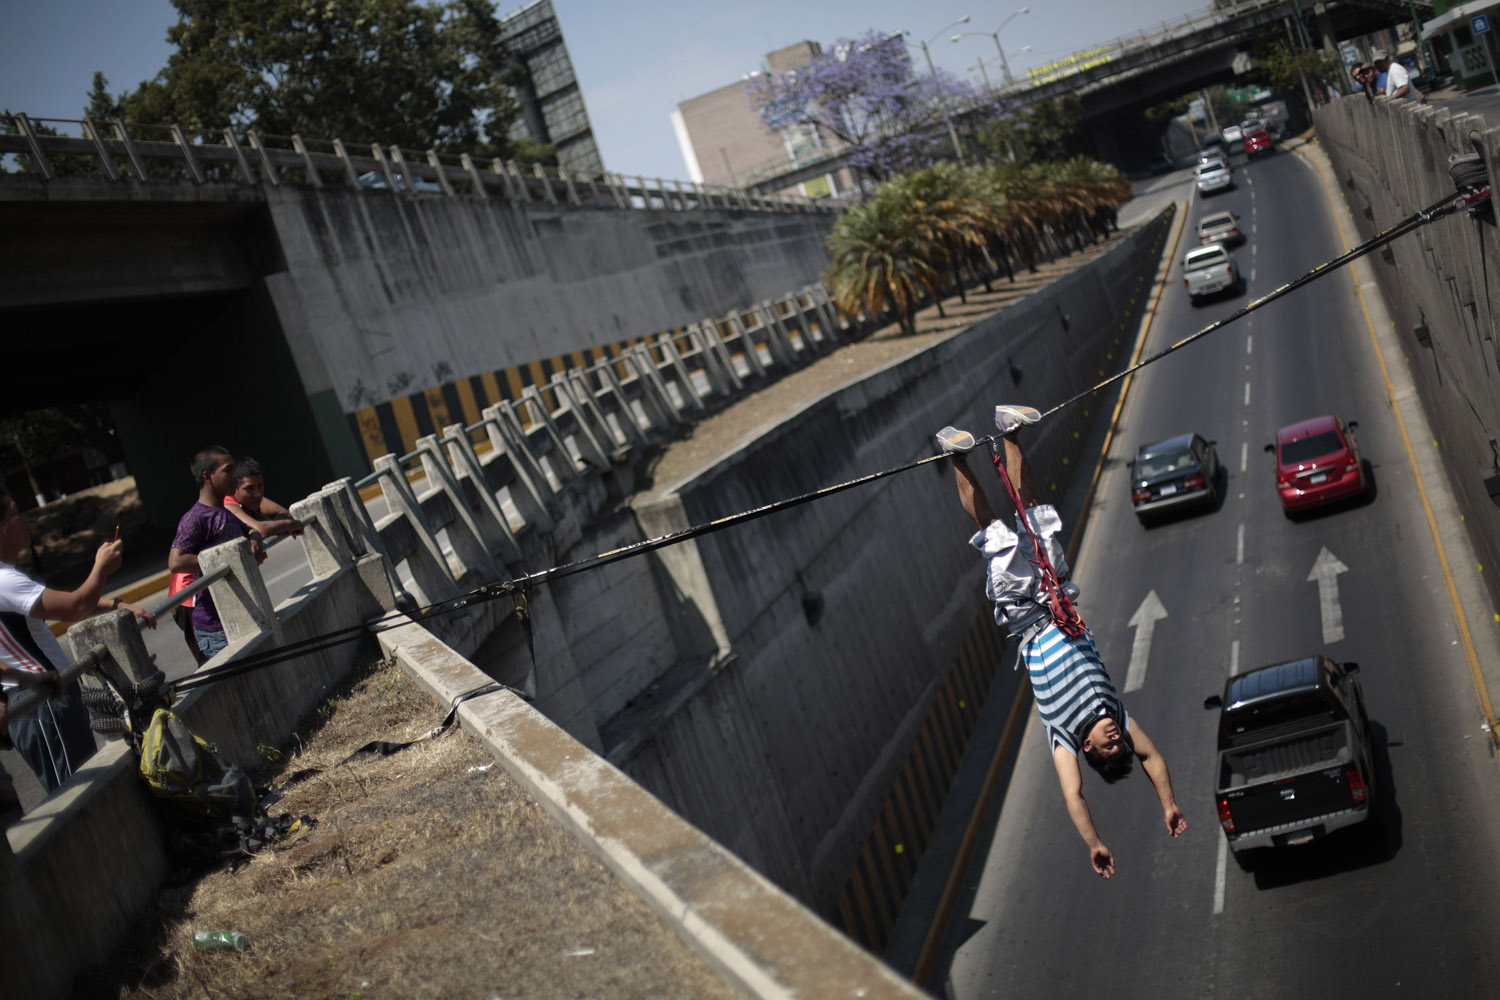 Feb. 24, 2013. Luis Amezquita hangs upside down over the Periferico avenue during a slacklining practice in Guatemala City, Guatemala.